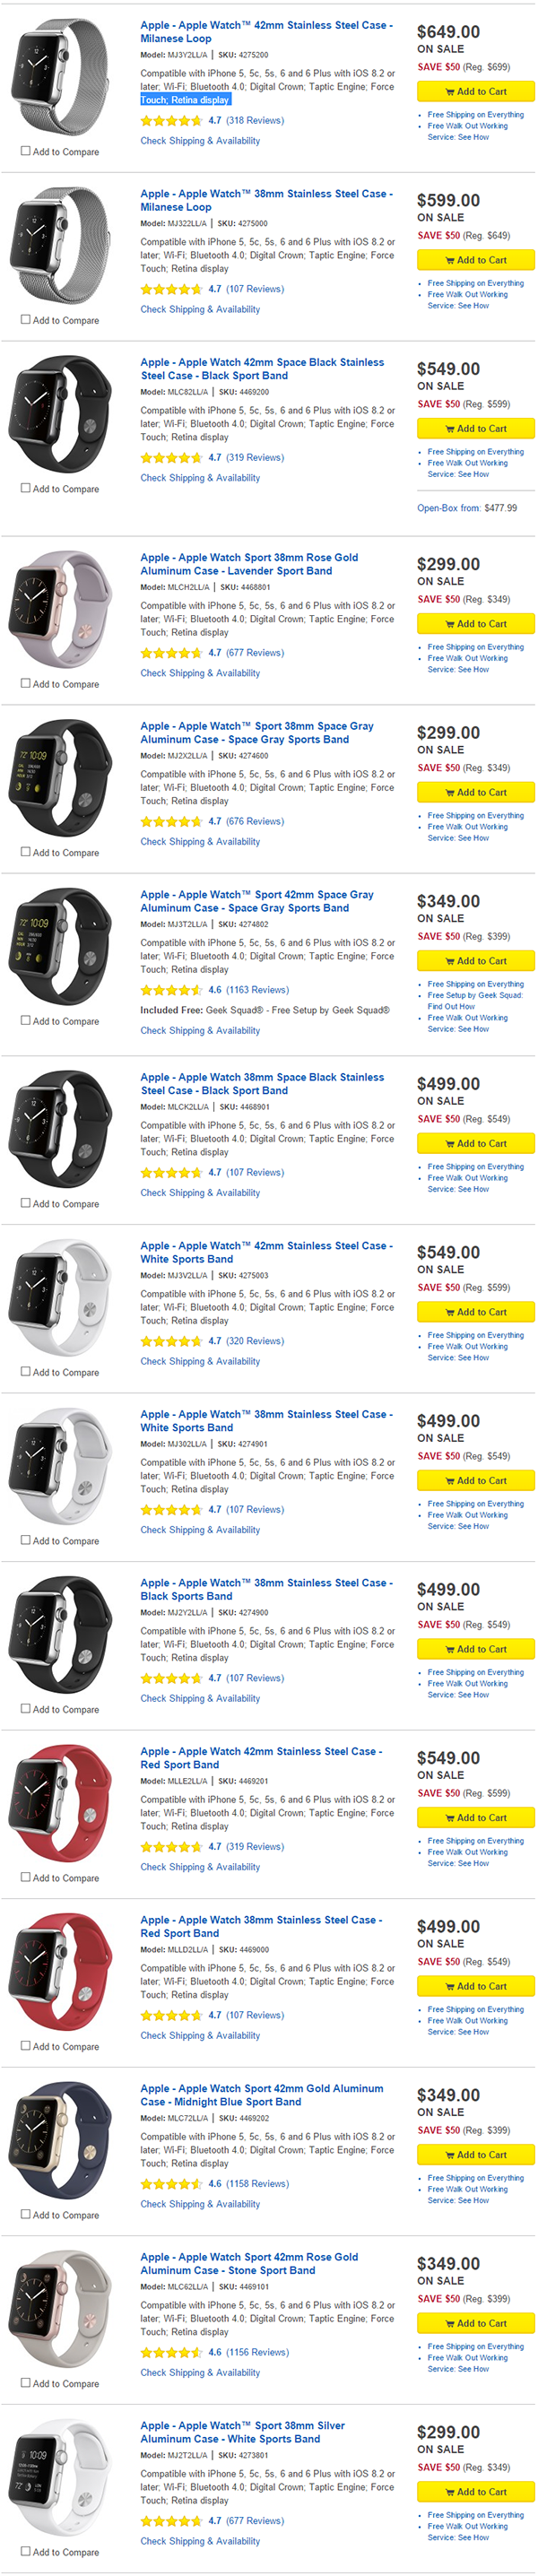 apple-watch-discounted